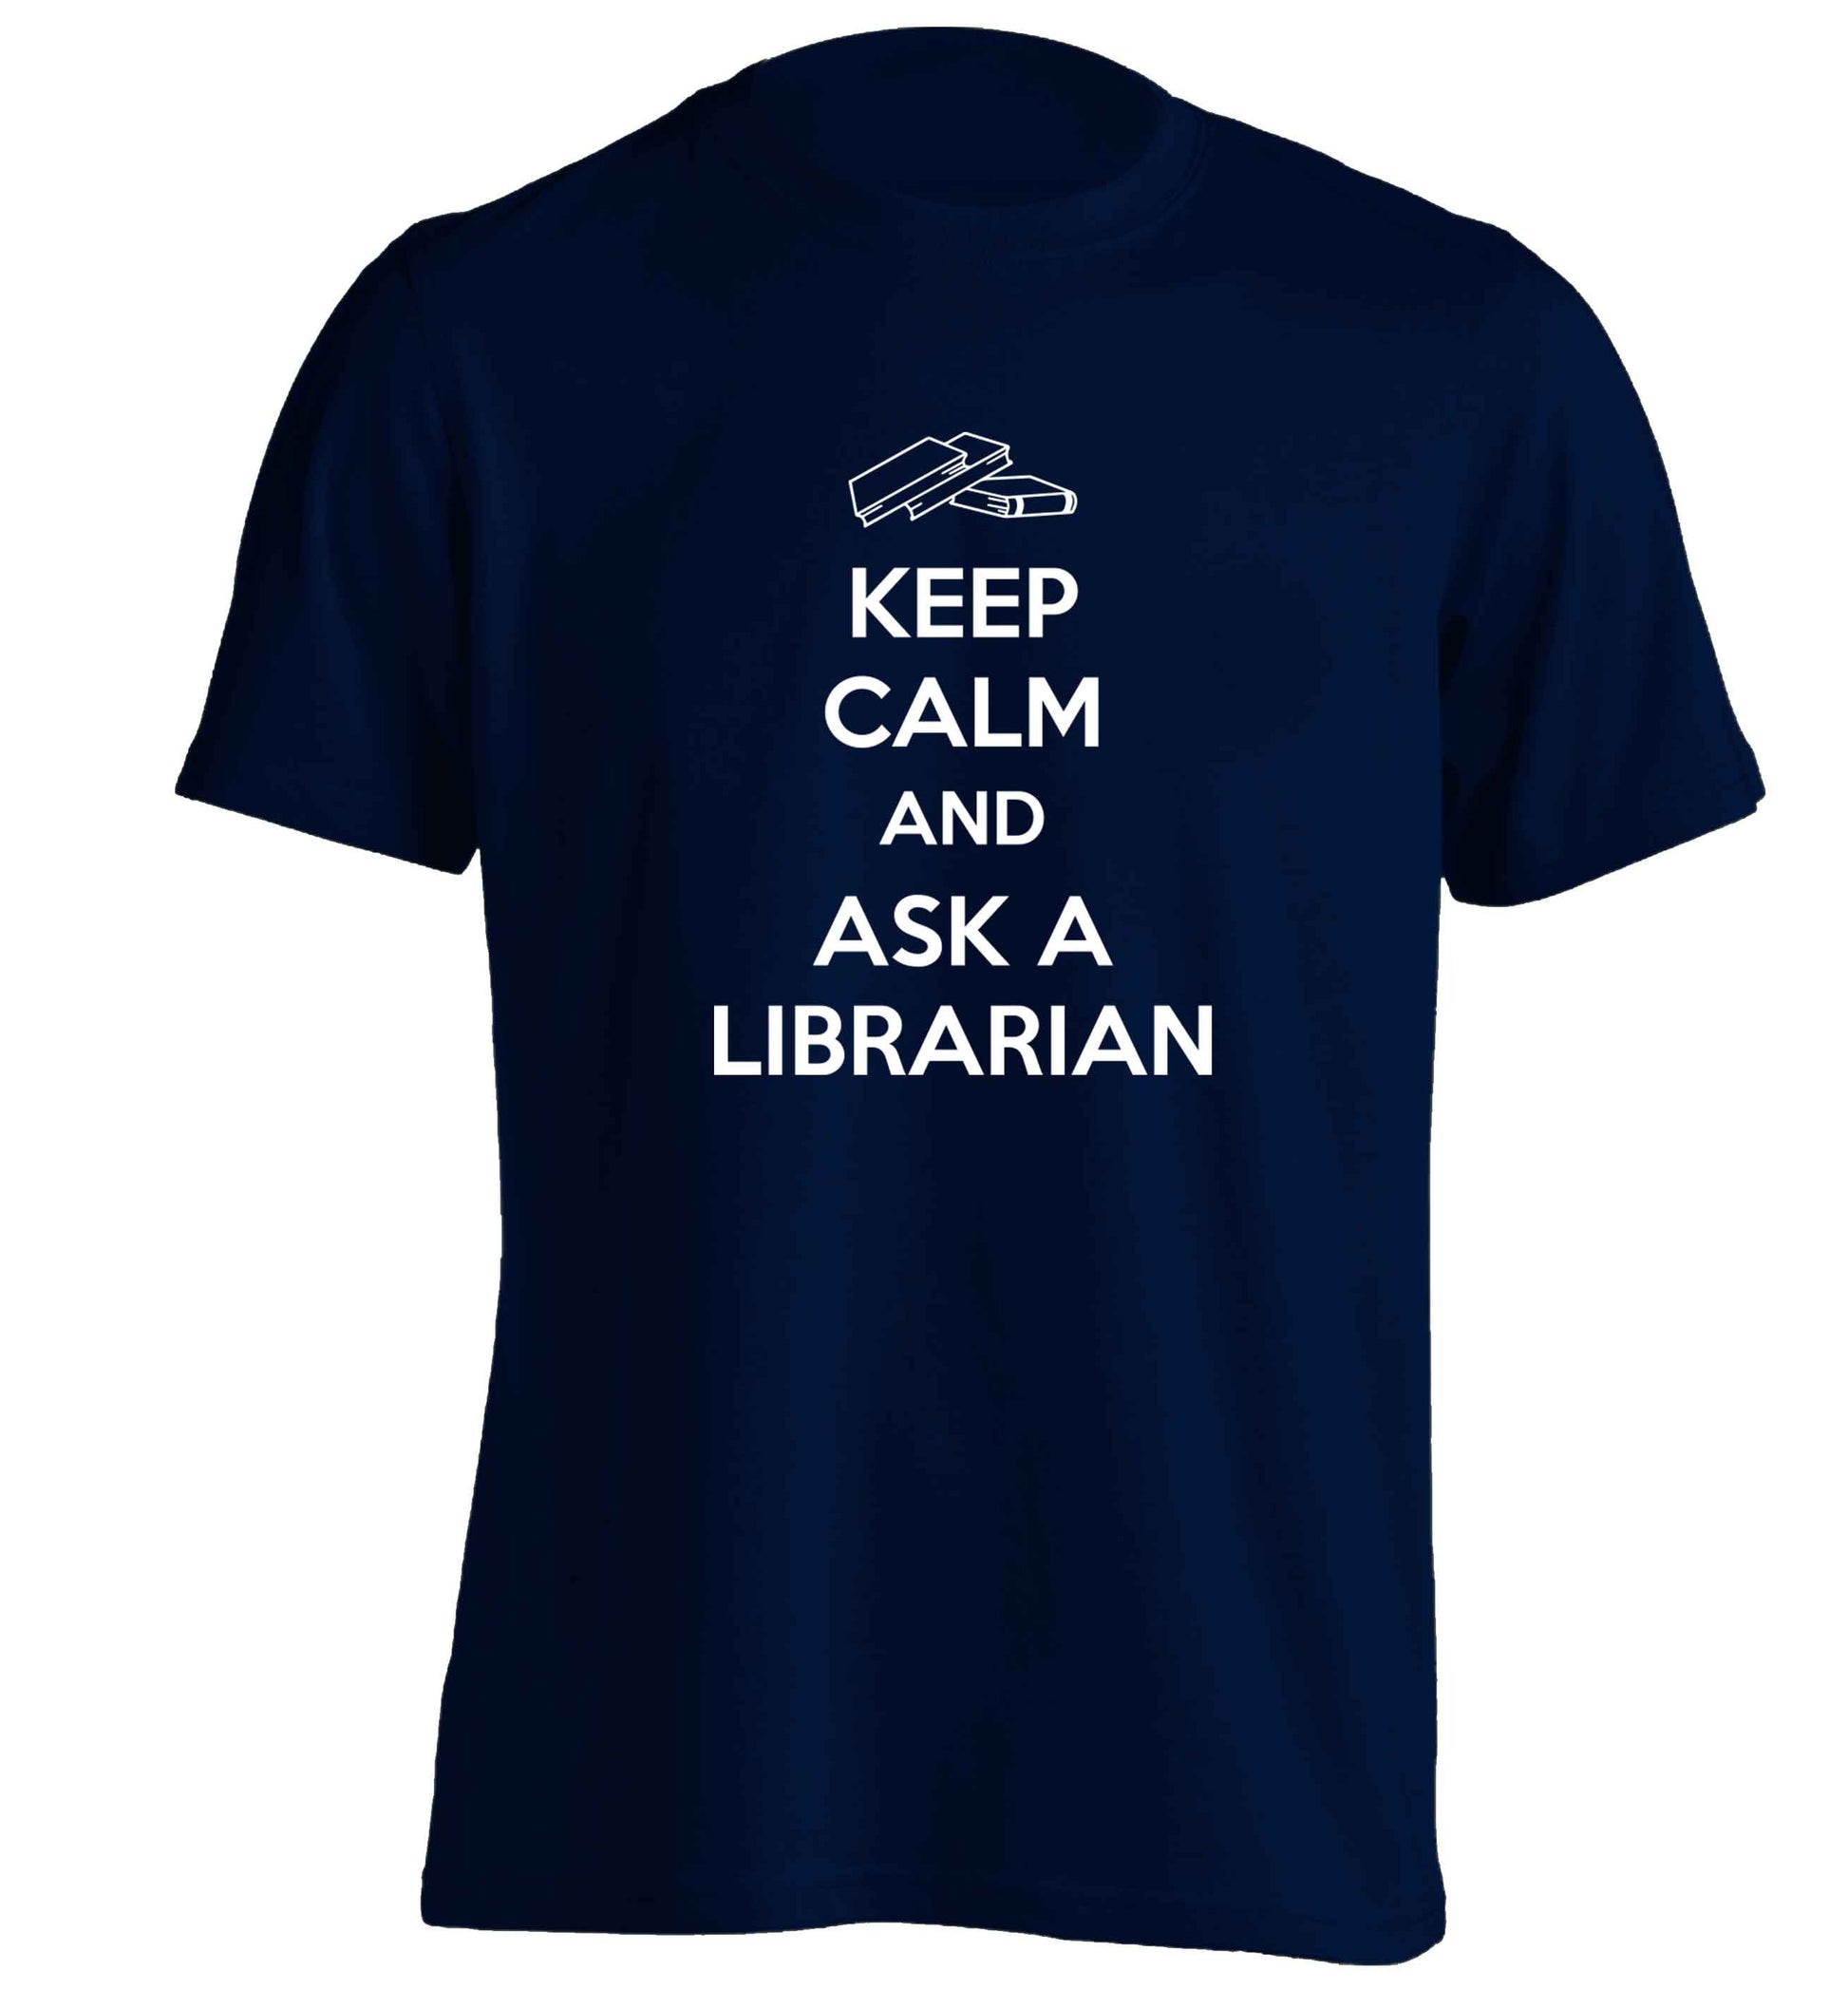 Keep calm and ask a librarian adults unisex navy Tshirt 2XL